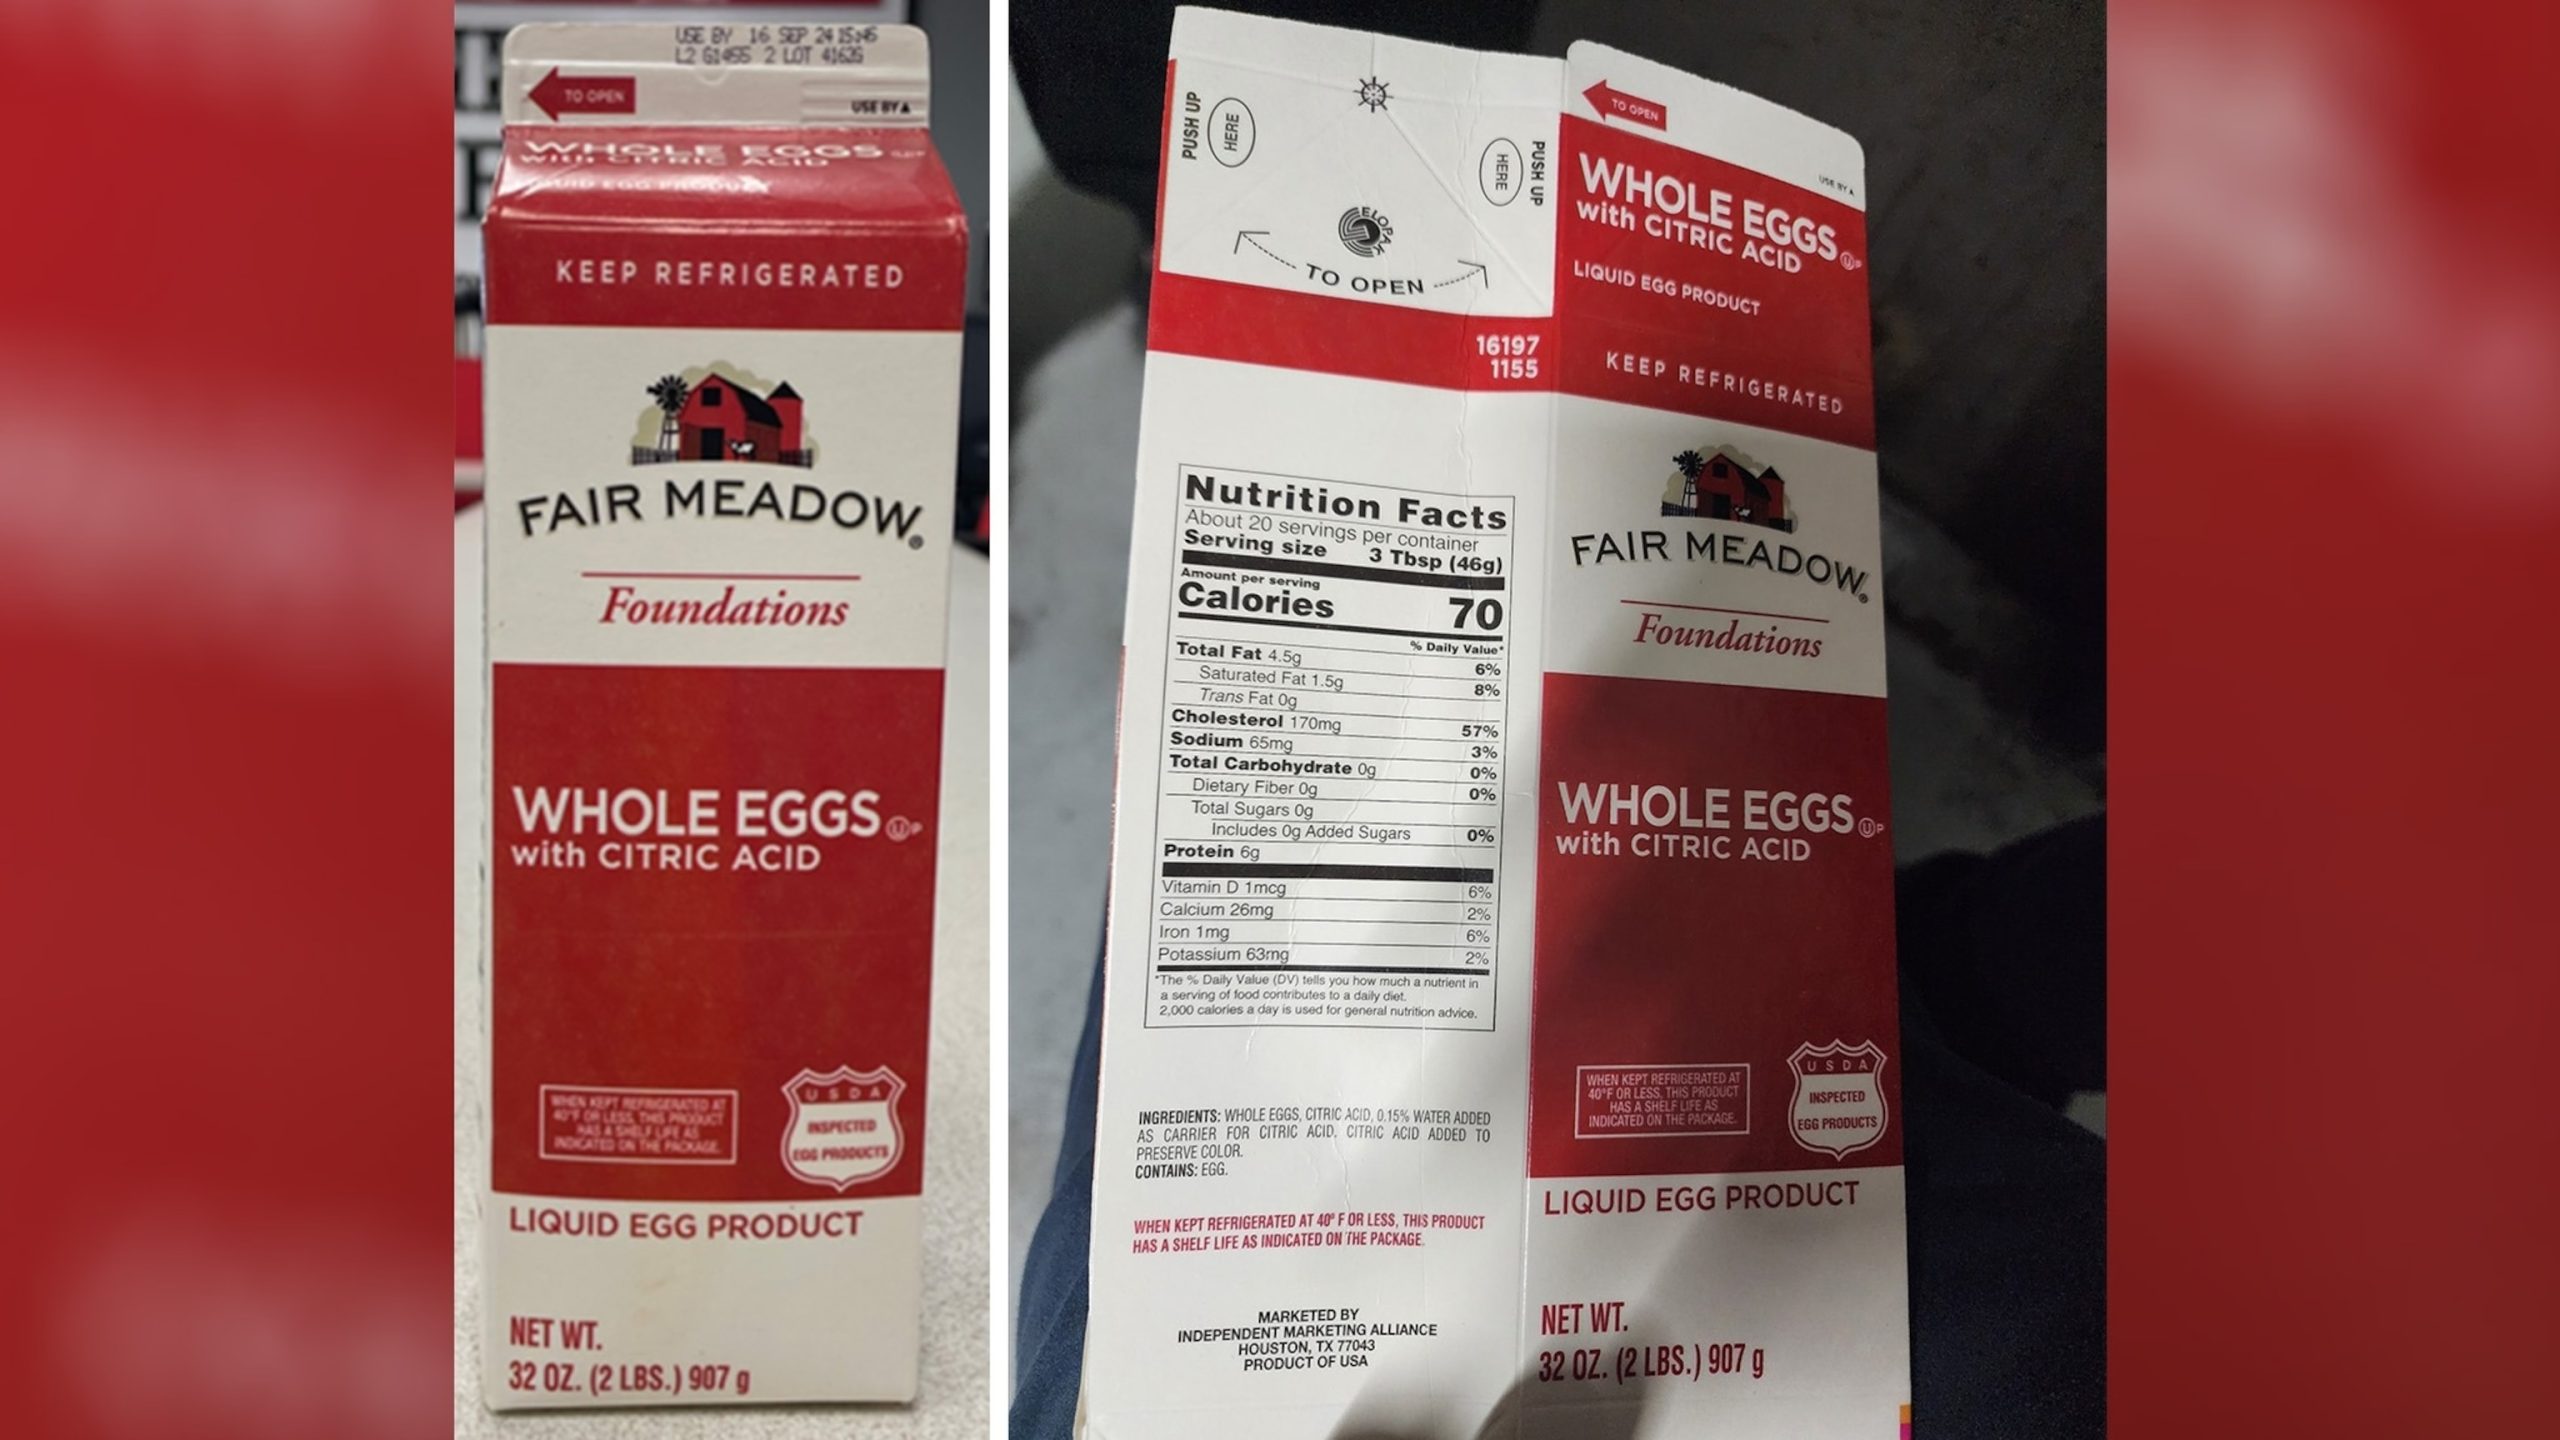 Recall of Over 4,000 Pounds of Liquid Eggs Across 9 States